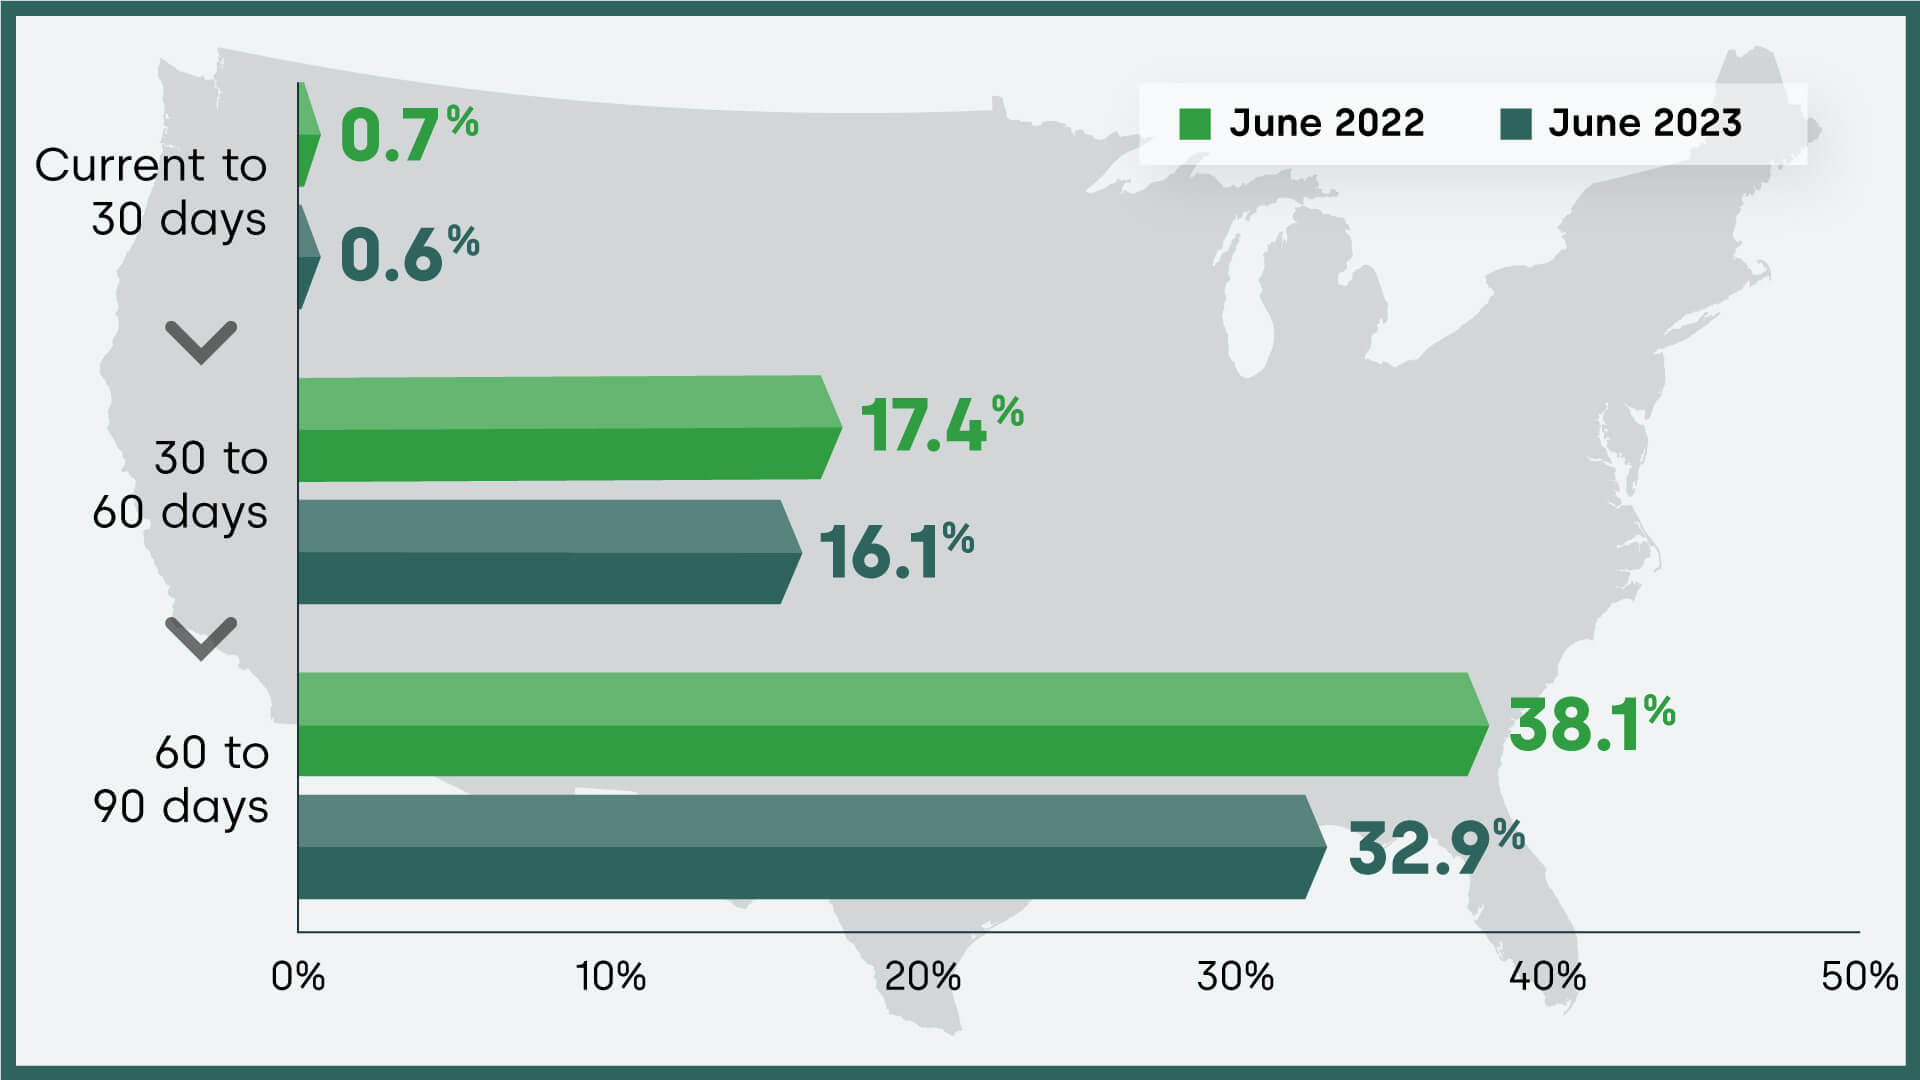 Share of delinquent mortgages transitioning from one stage to the next and year-over-year change, June 2023